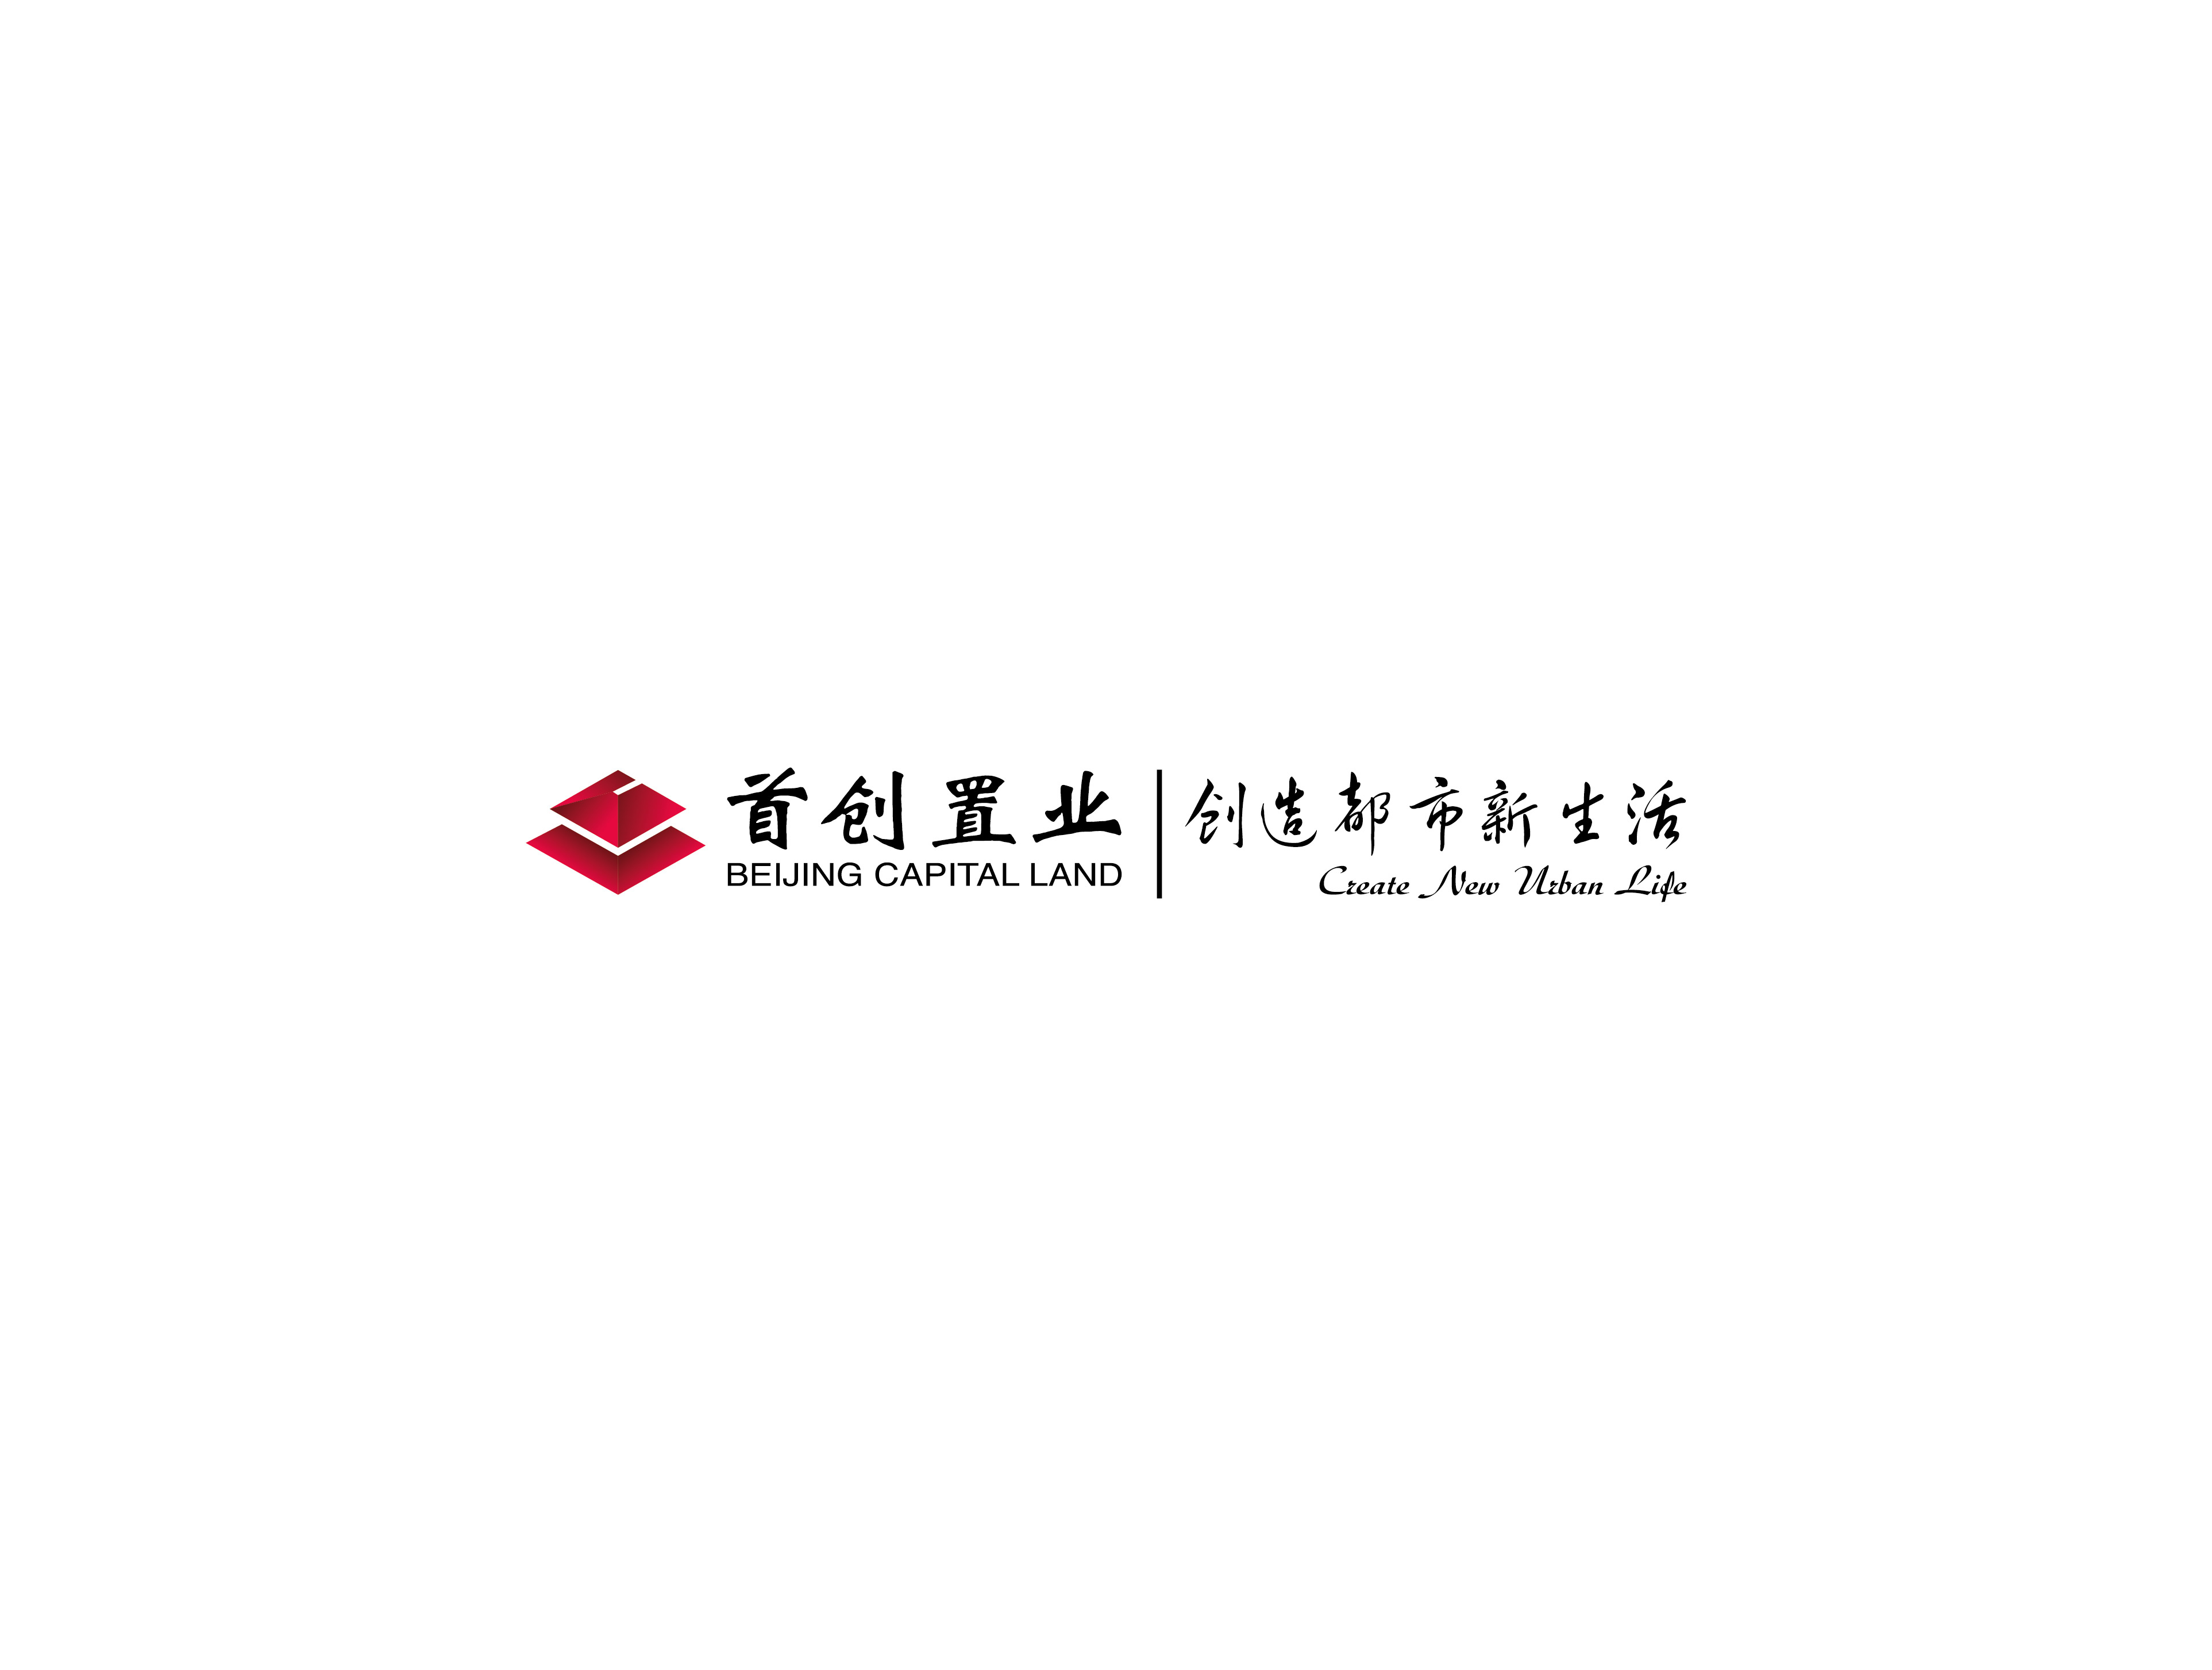 BCL’s Contracted Sales Reaches RMB 7.3 Billion By April 2015, Increasing 83%